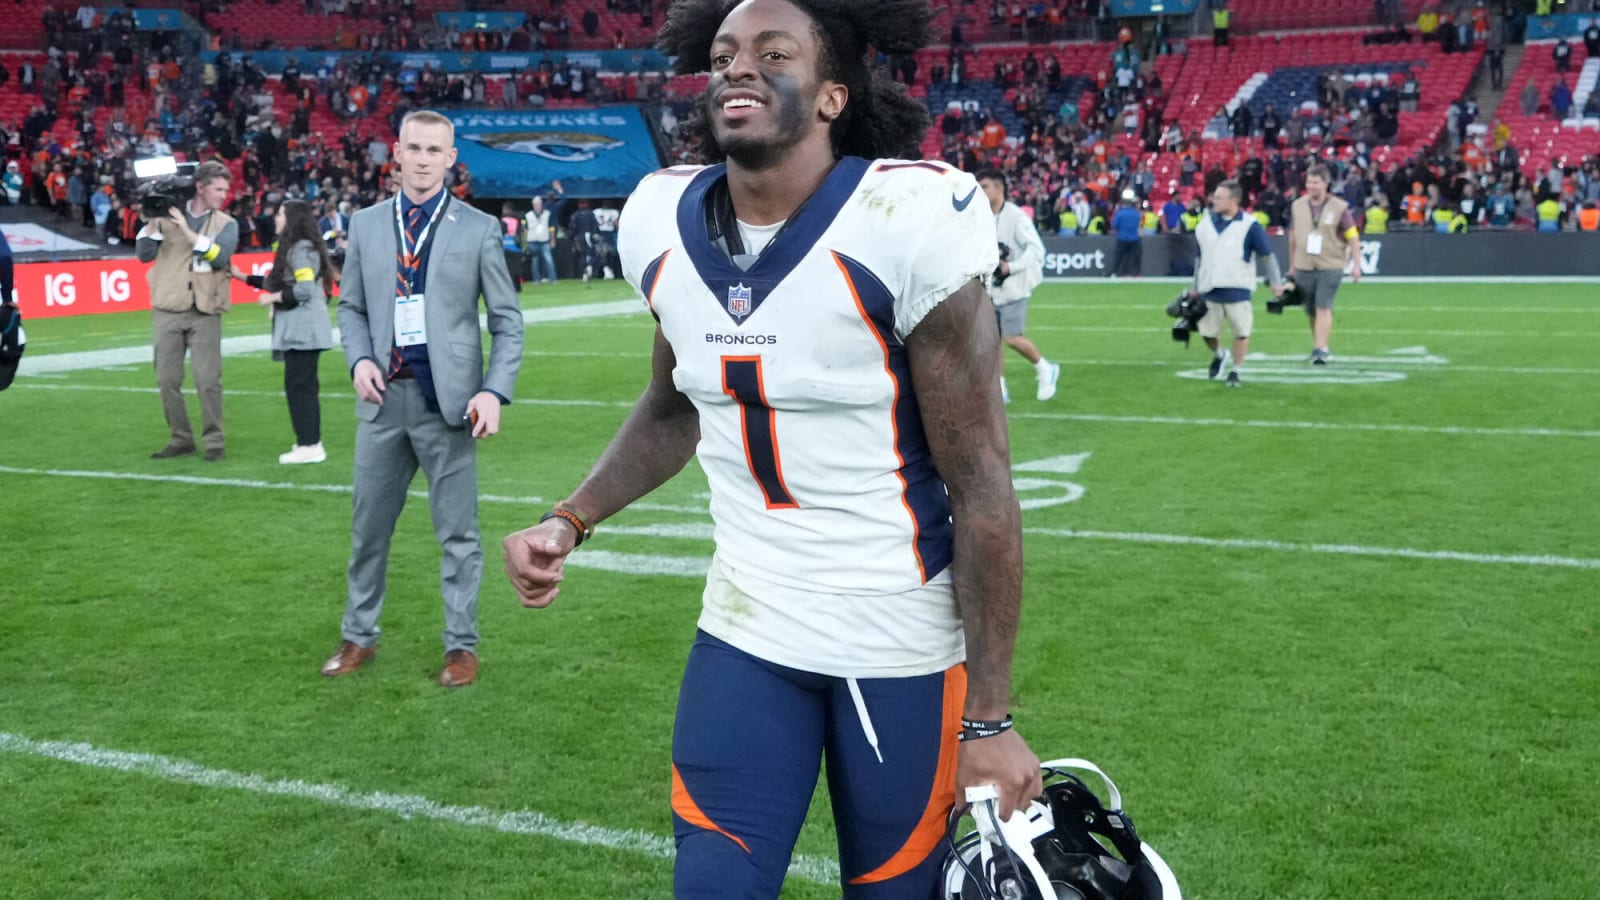 KJ Hamler stepping away from Broncos after heart condition diagnosis